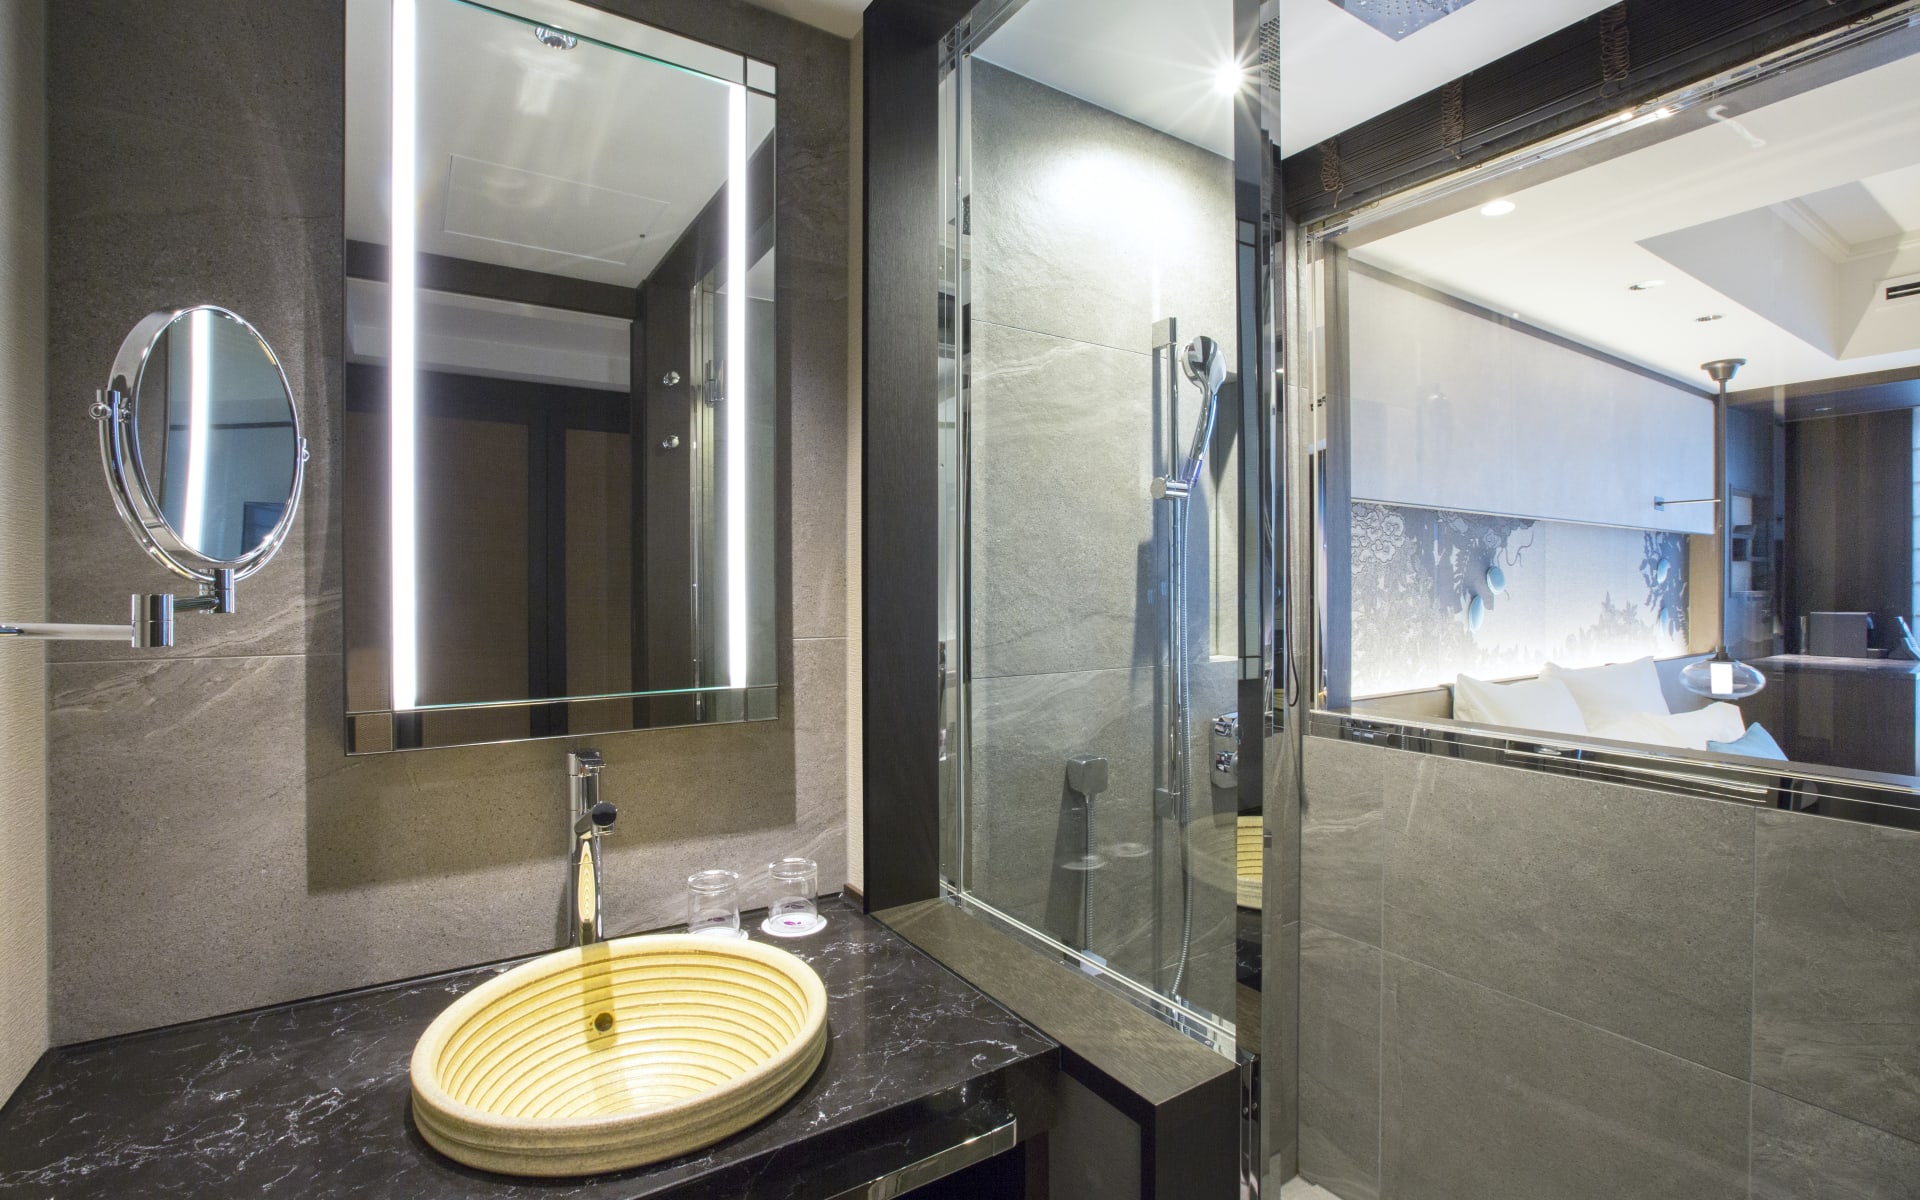 The bathroom at Dhawa Yura has a large mirror, sink and walk-in shower. 